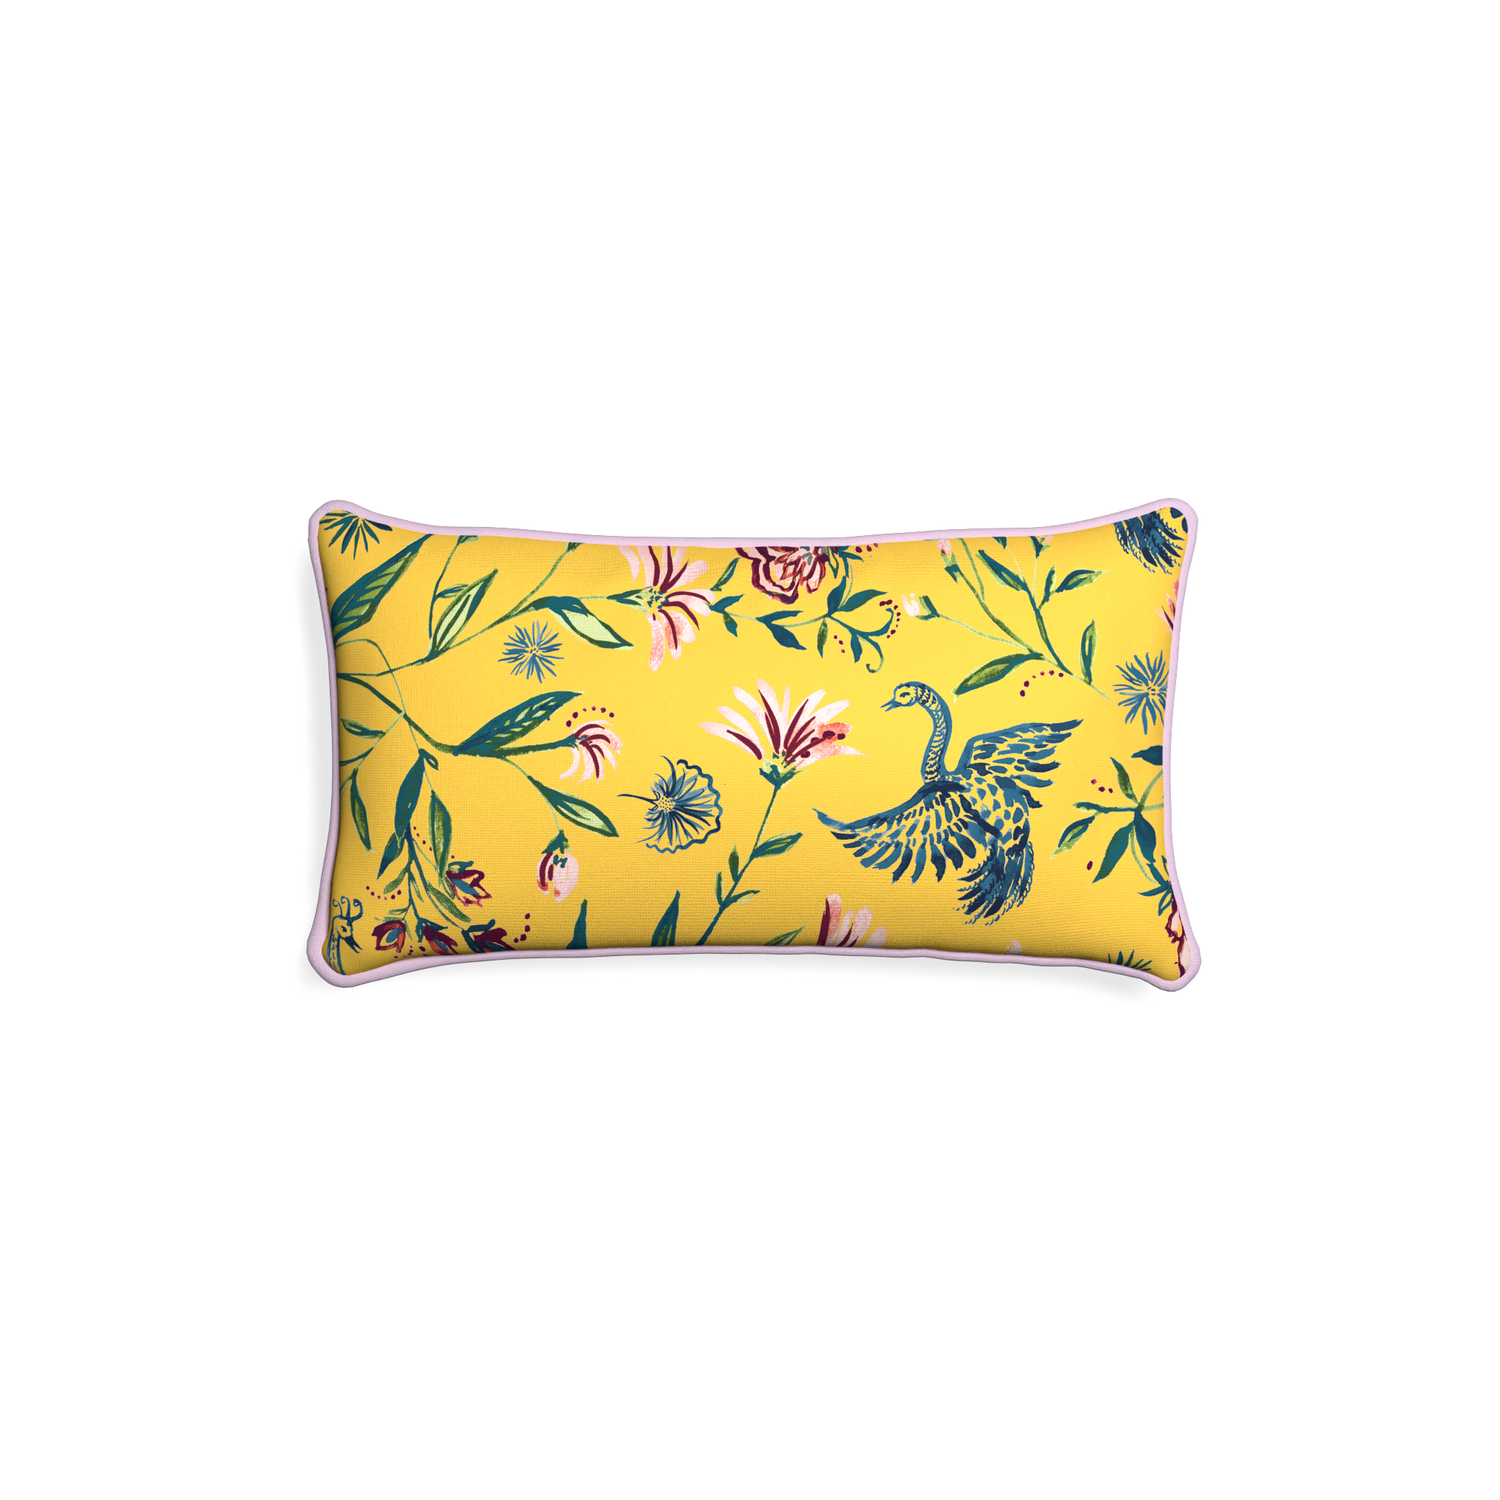 Petite-lumbar daphne canary custom yellow chinoiseriepillow with l piping on white background